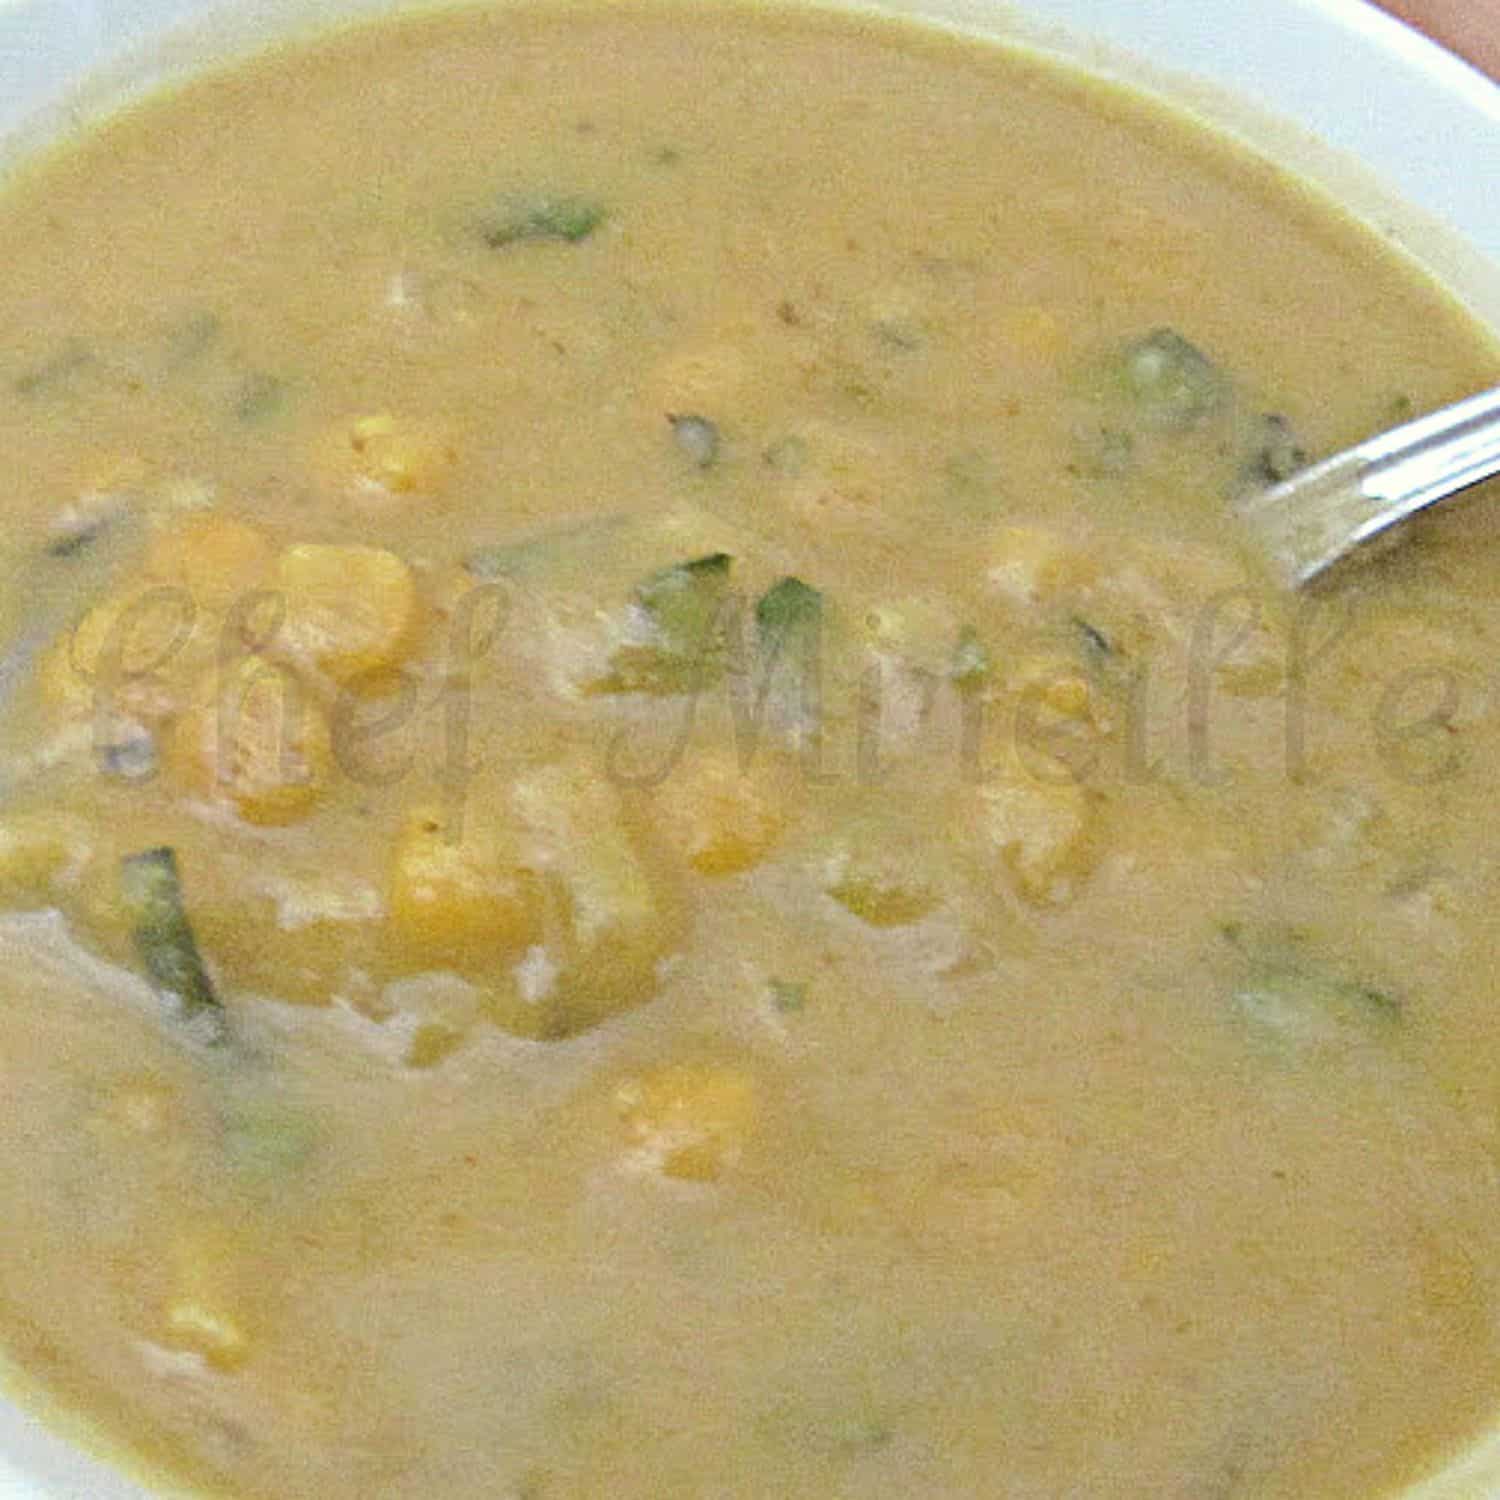 Trinidadian Dhal Recipe in a bowl with a spoon